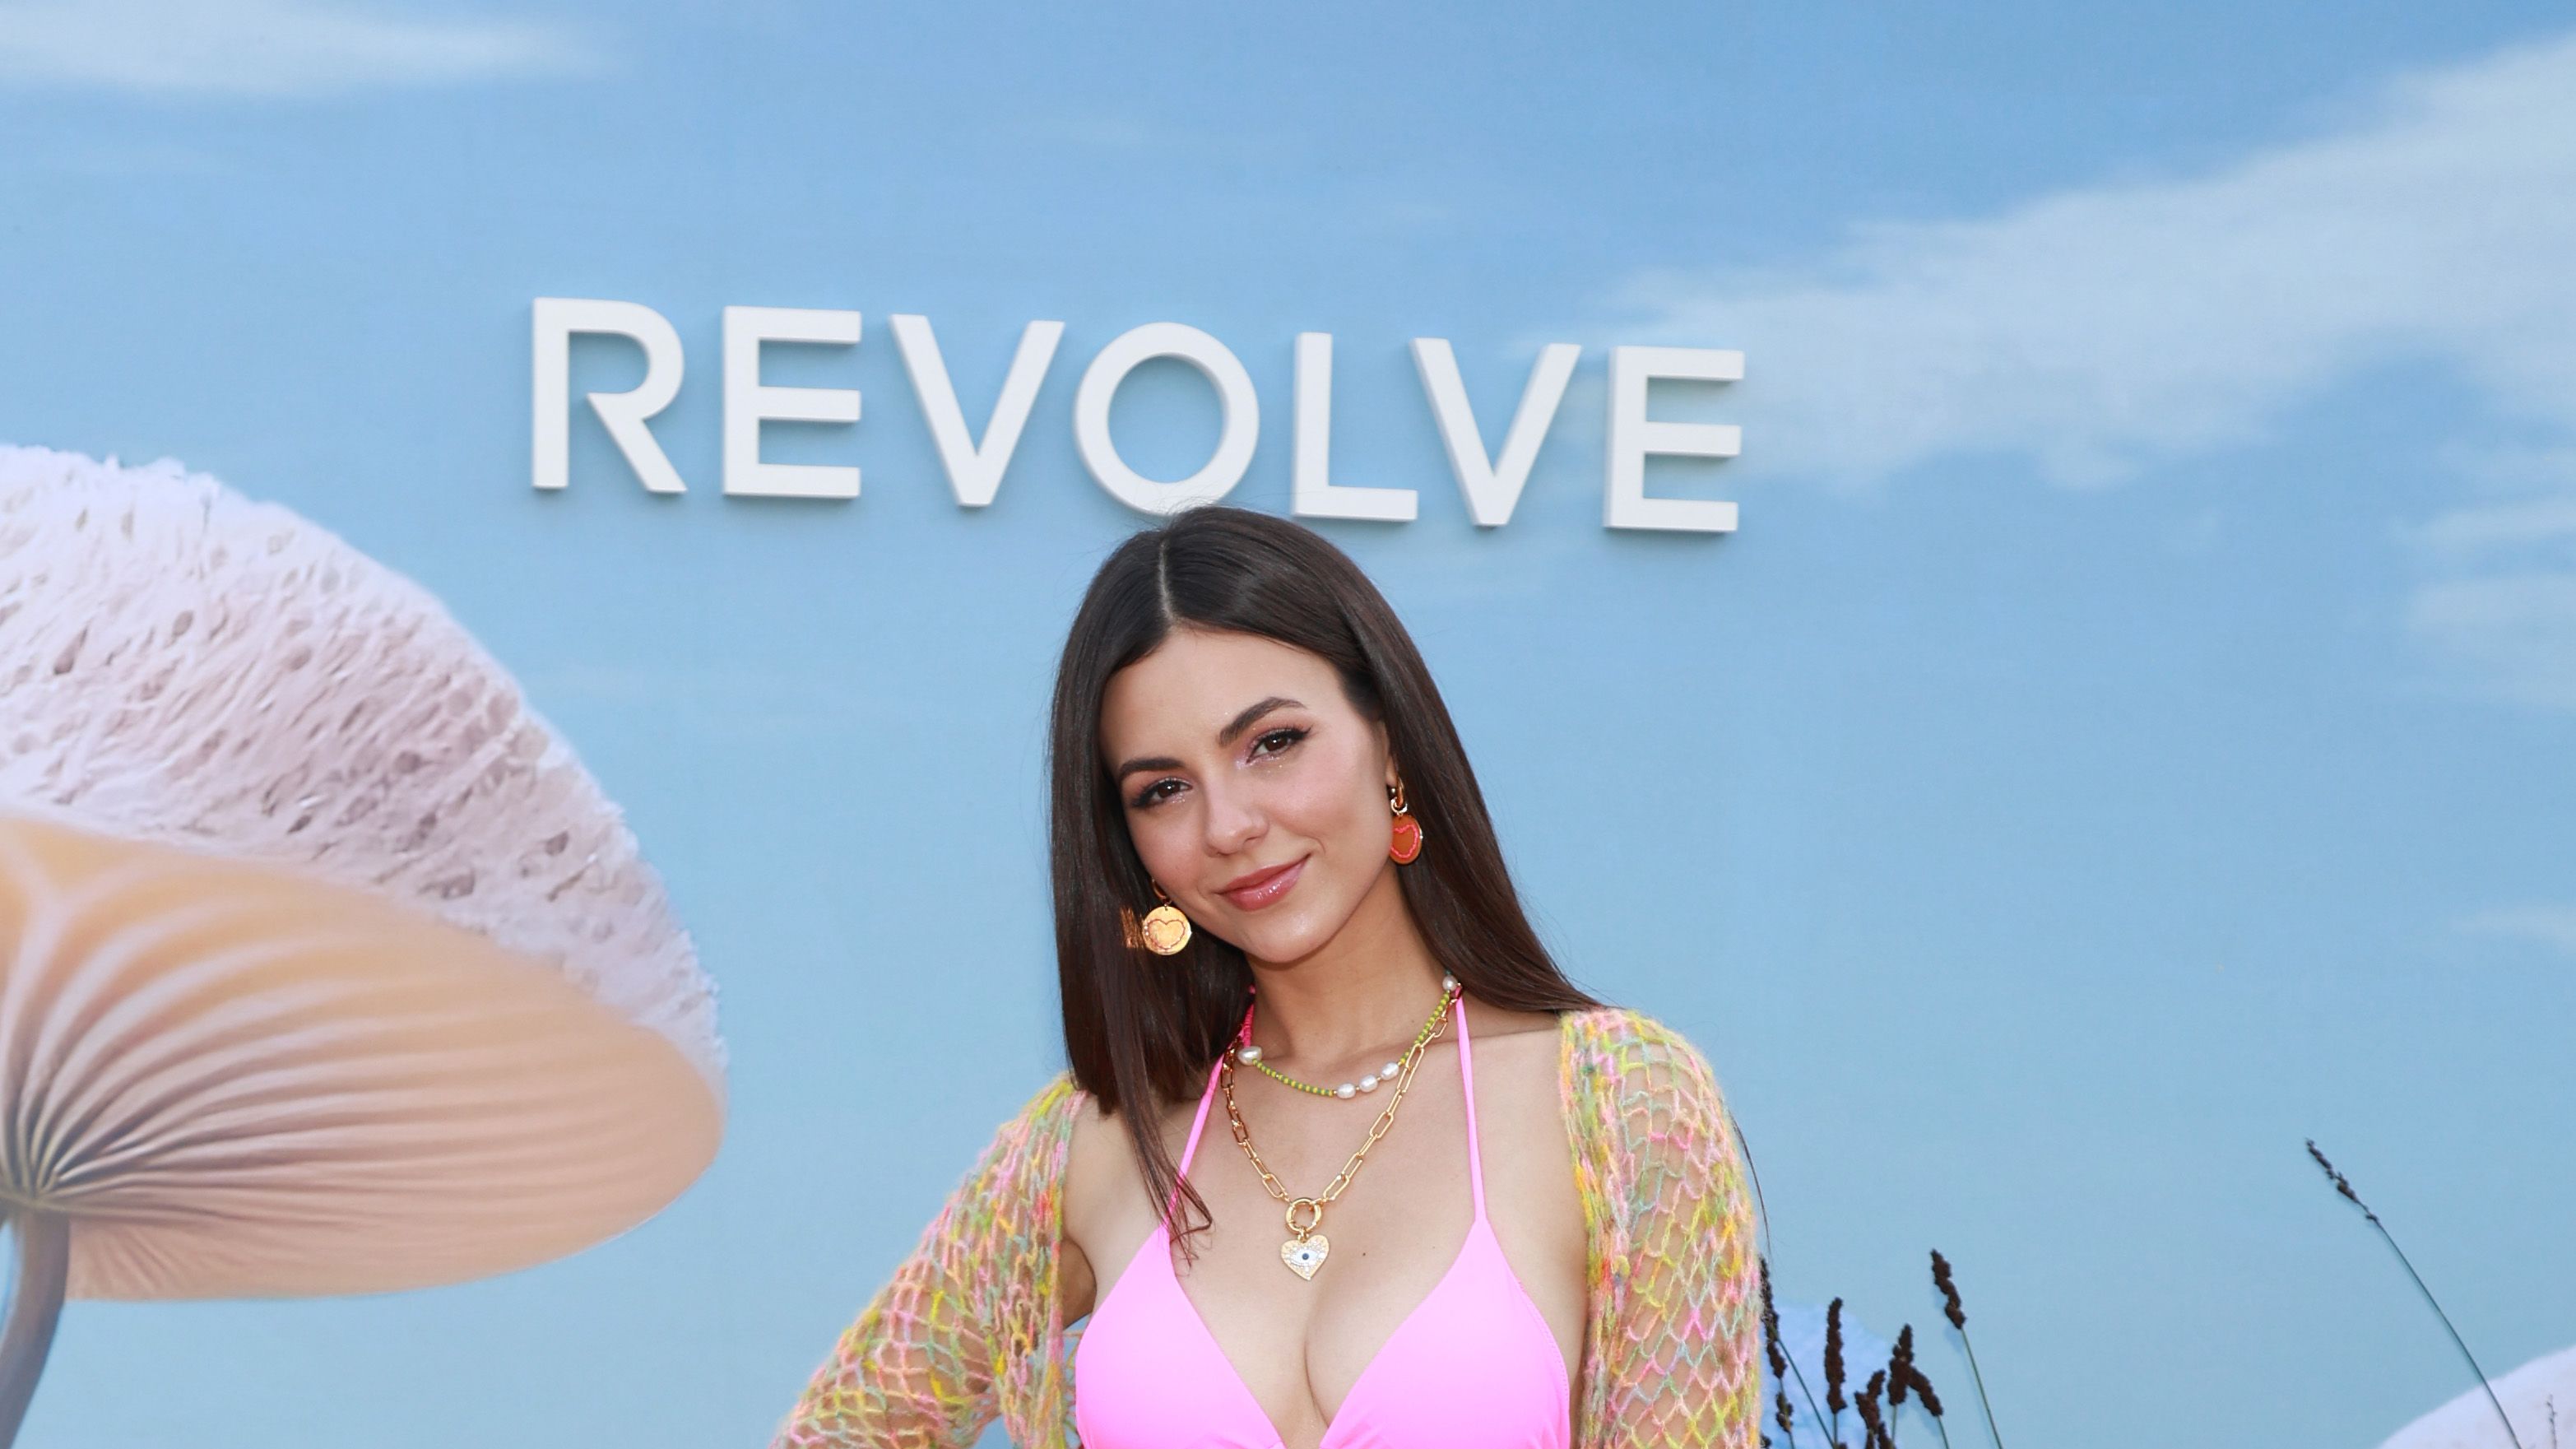 Ariana Grande Victorious Porn Lesbian - Victoria Justice Denies Rumors That She's Jealous of Ariana Grande